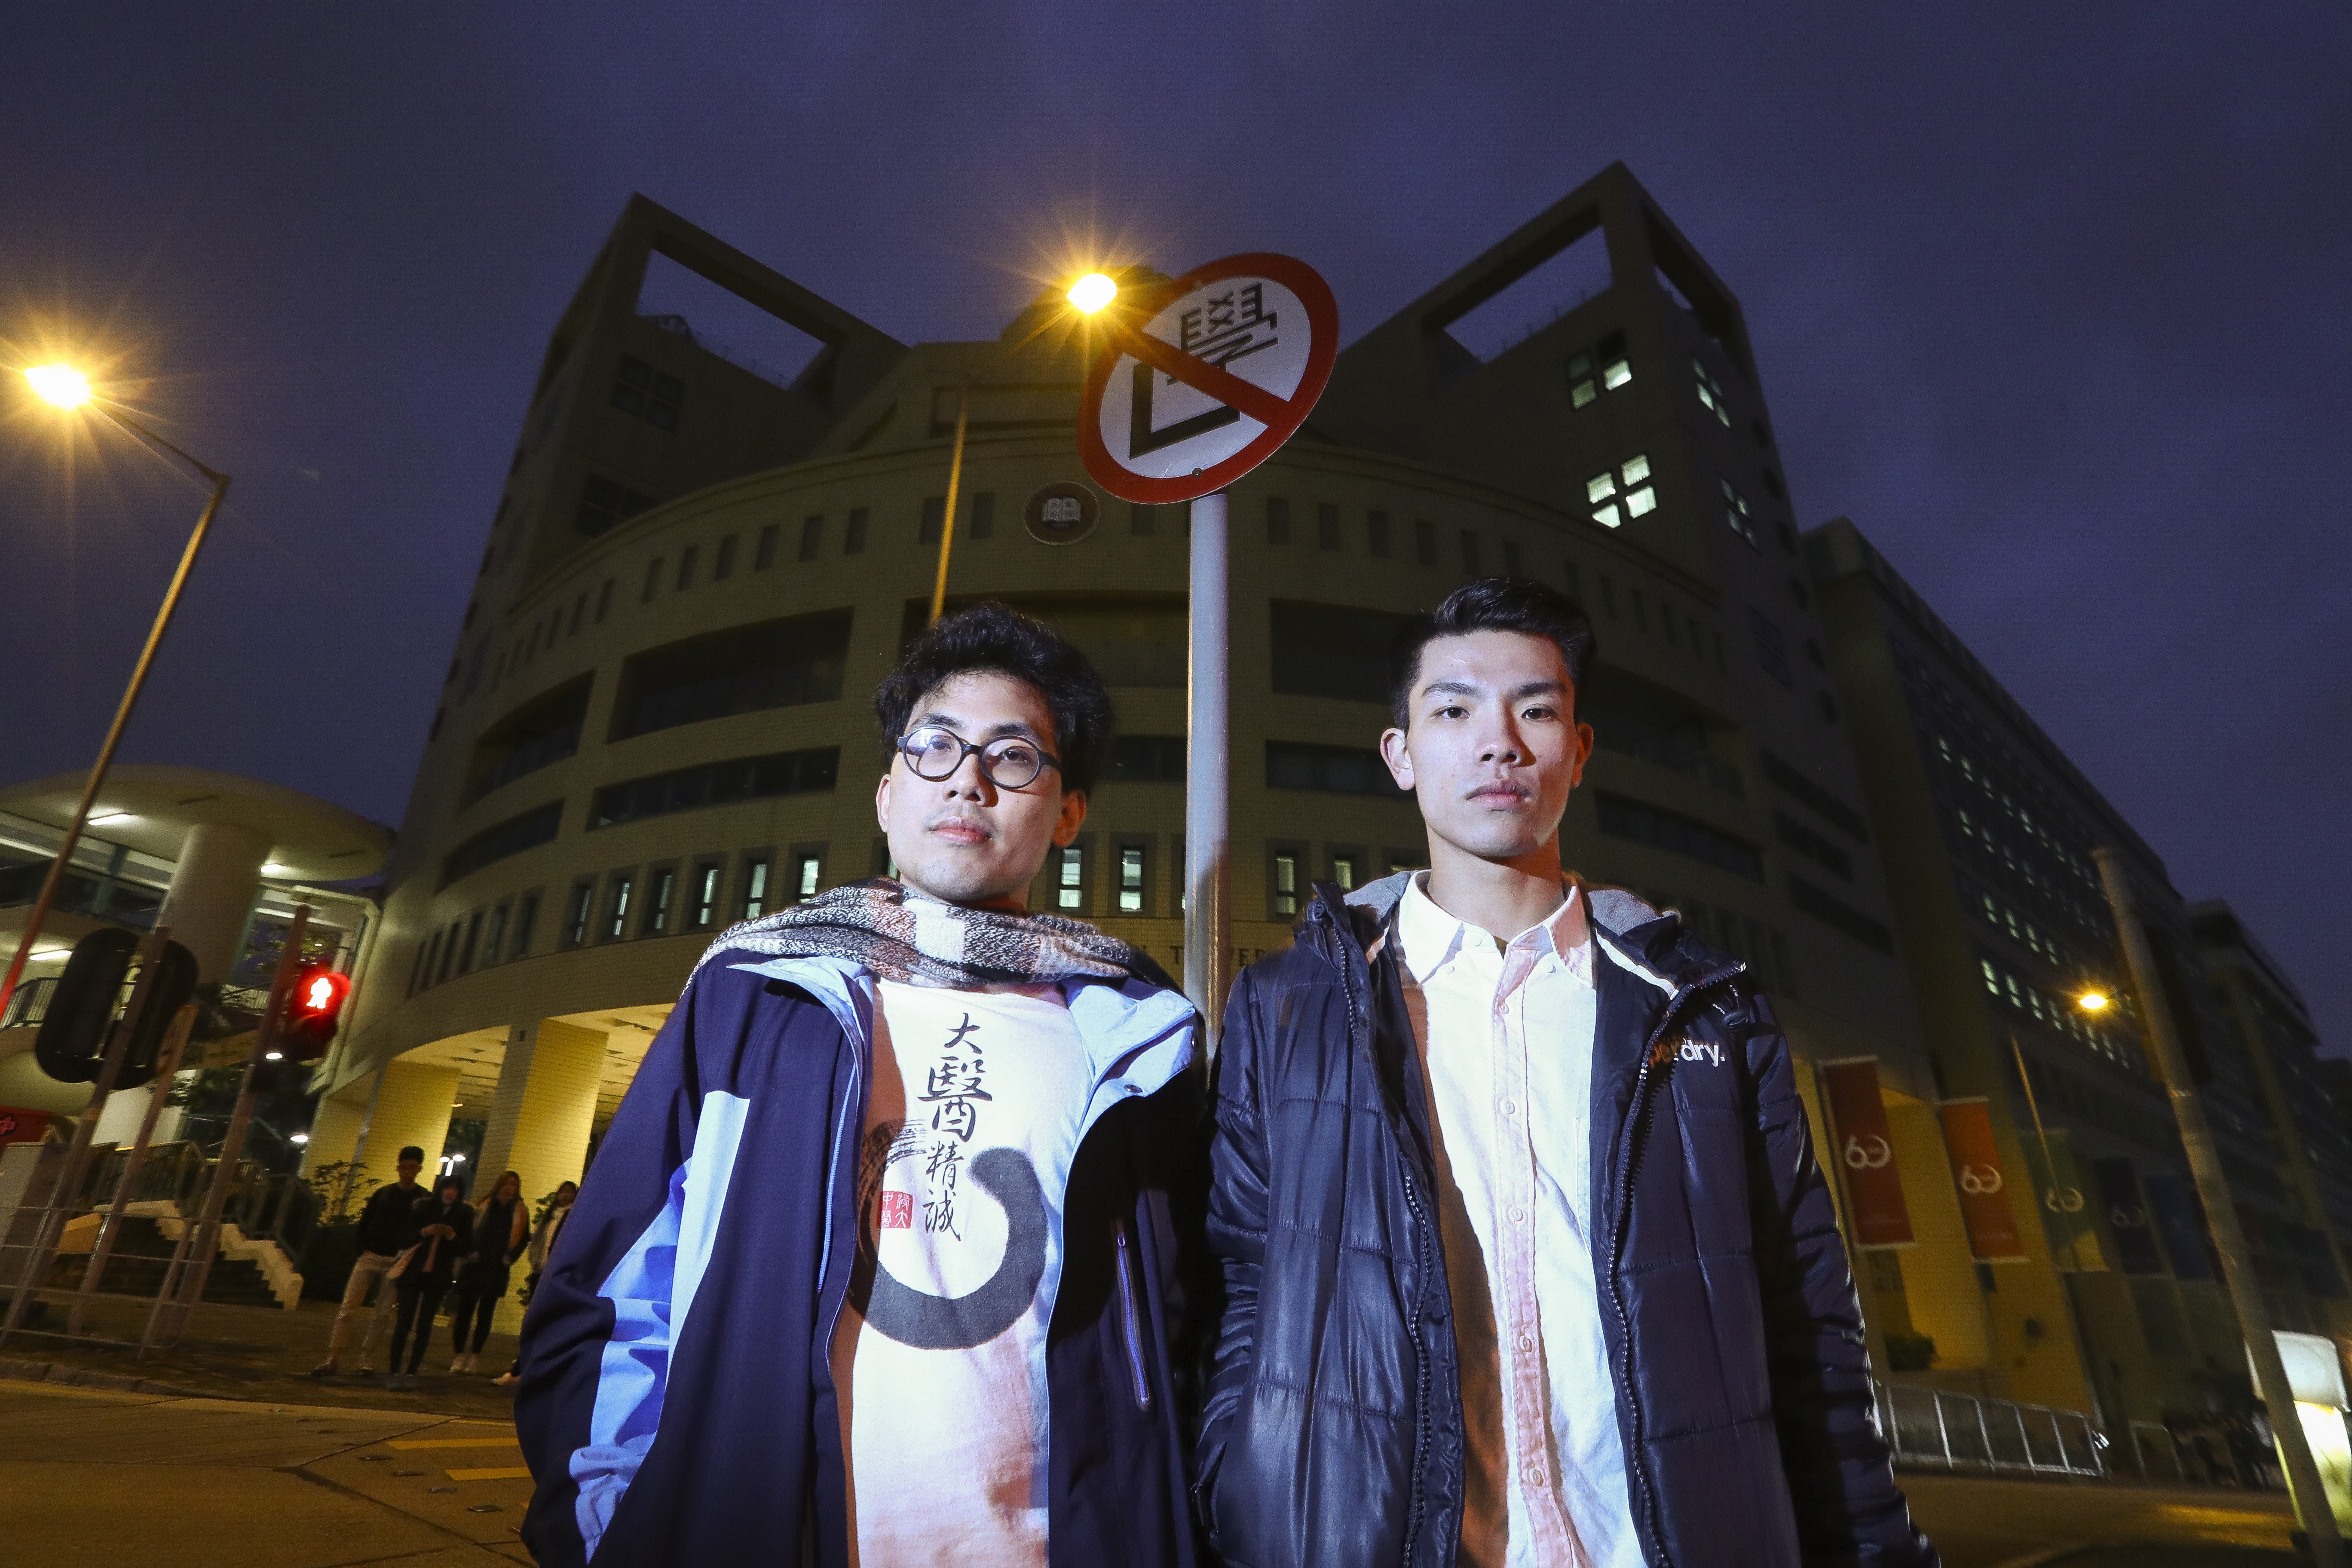 Andrew Chan (left) and Lau Tsz-kei (right) were reinstated to their classes after apologising in person to staff involved in the heated row. Photo: Nora Tam